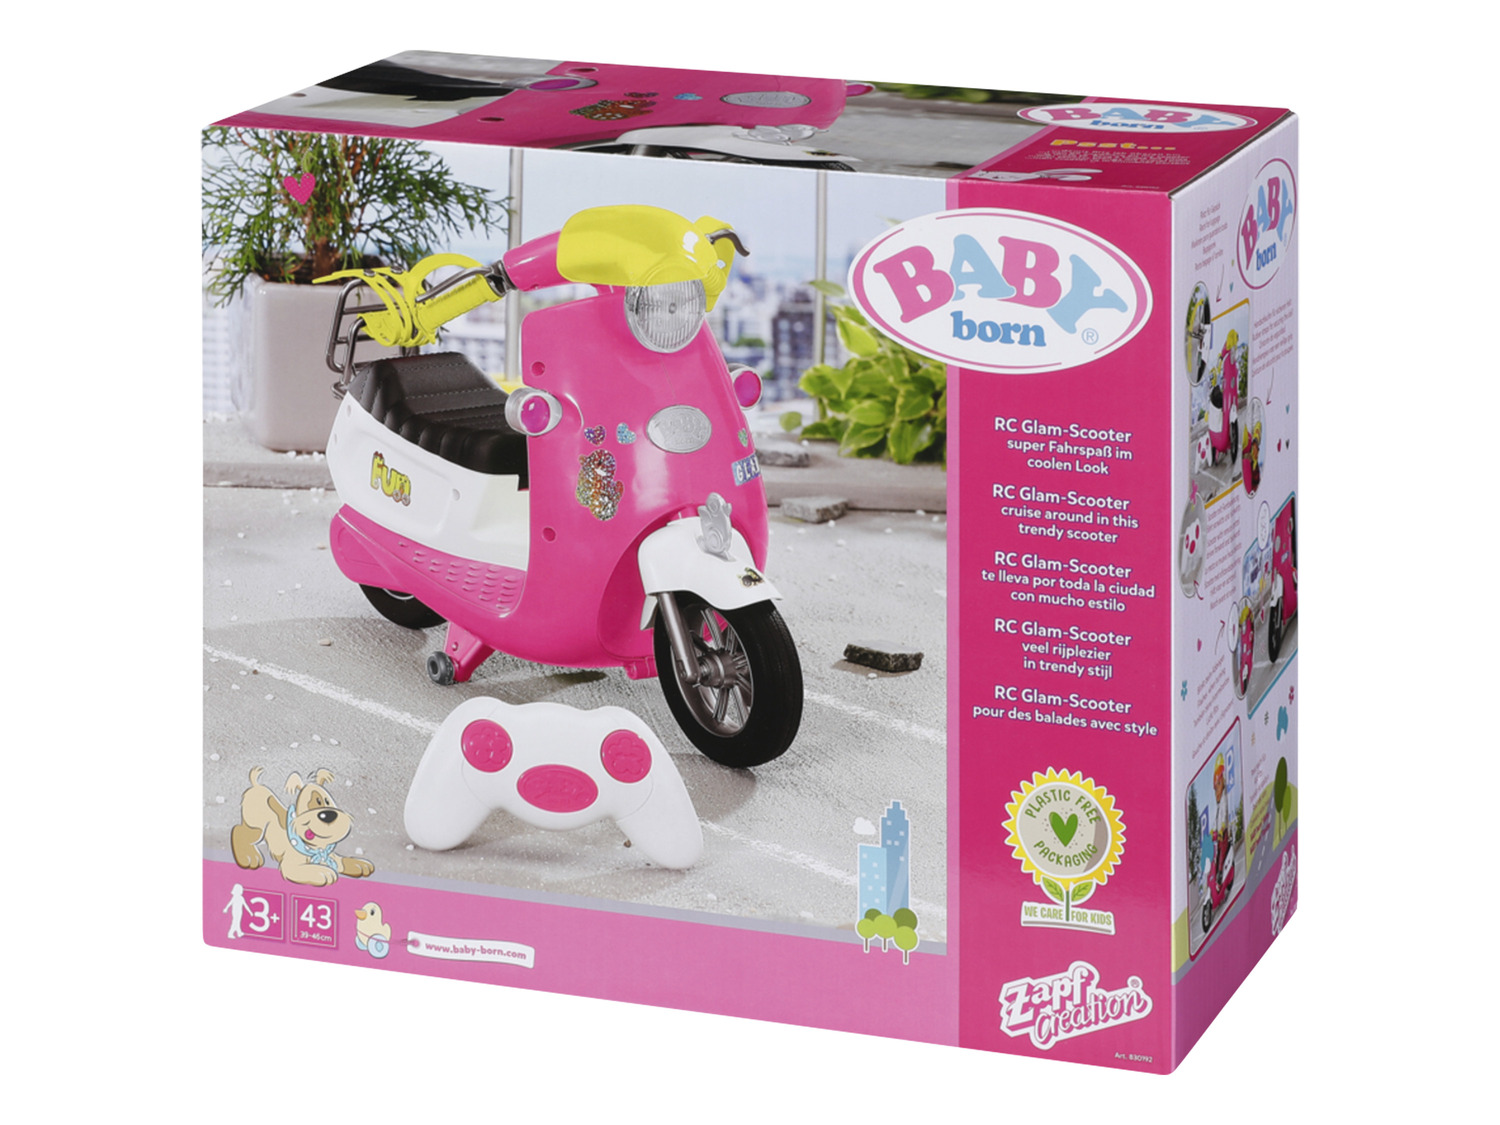 Glam-Scooter, Baby Born ferngesteuert LIDL City RC |